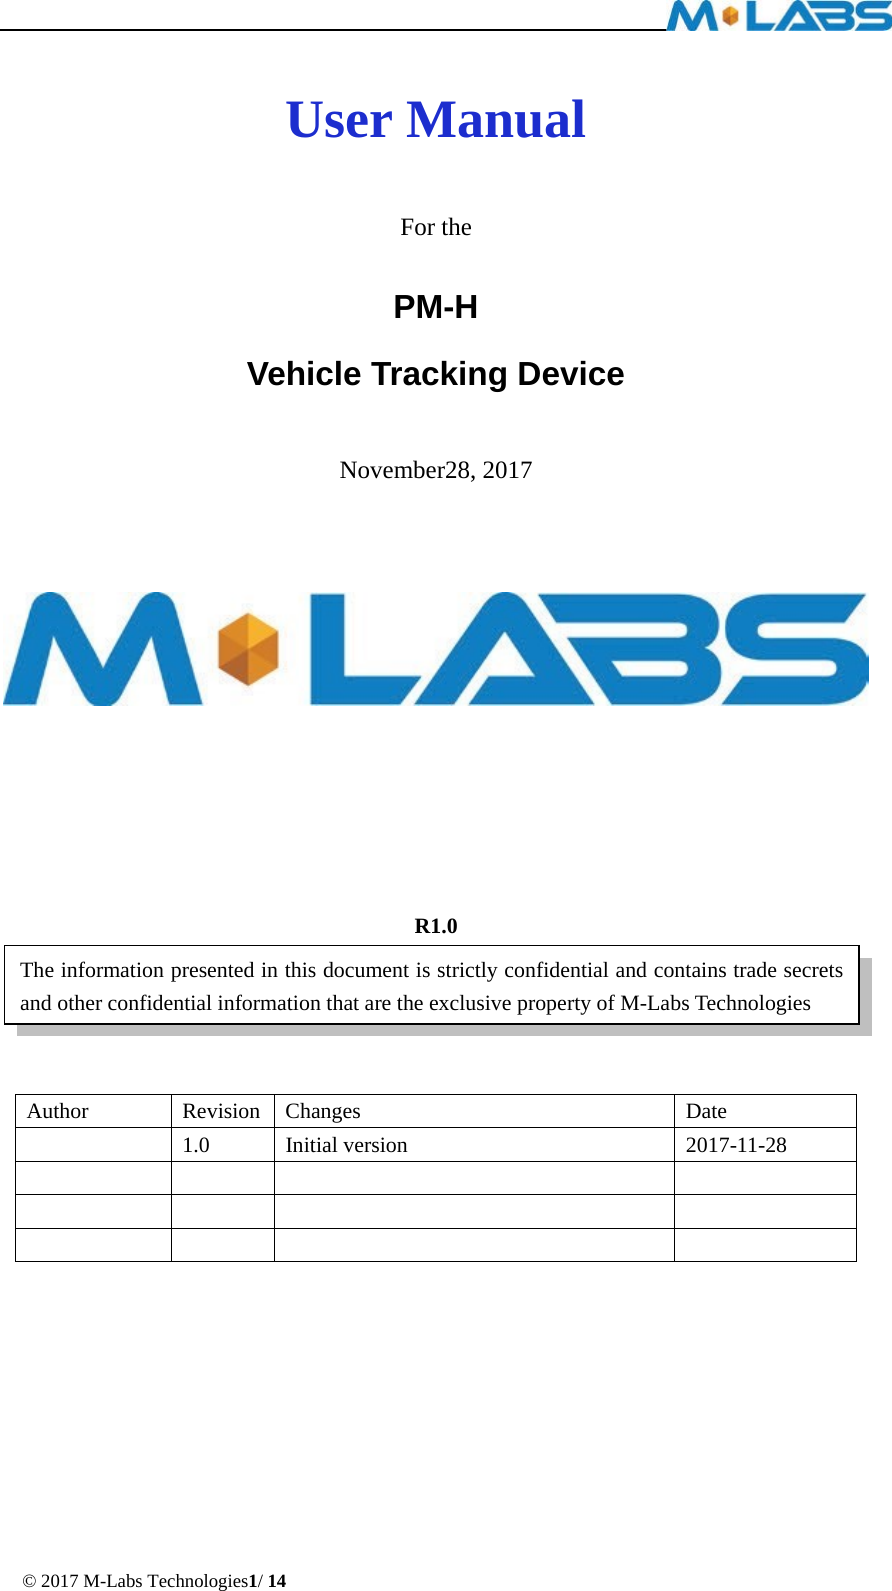  © 2017 M-Labs Technologies1/ 14  User Manual  For the PM-H Vehicle Tracking Device  November28, 2017           R1.0    Author Revision Changes Date  1.0 Initial version 2017-11-28                  The information presented in this document is strictly confidential and contains trade secrets and other confidential information that are the exclusive property of M-Labs Technologies 